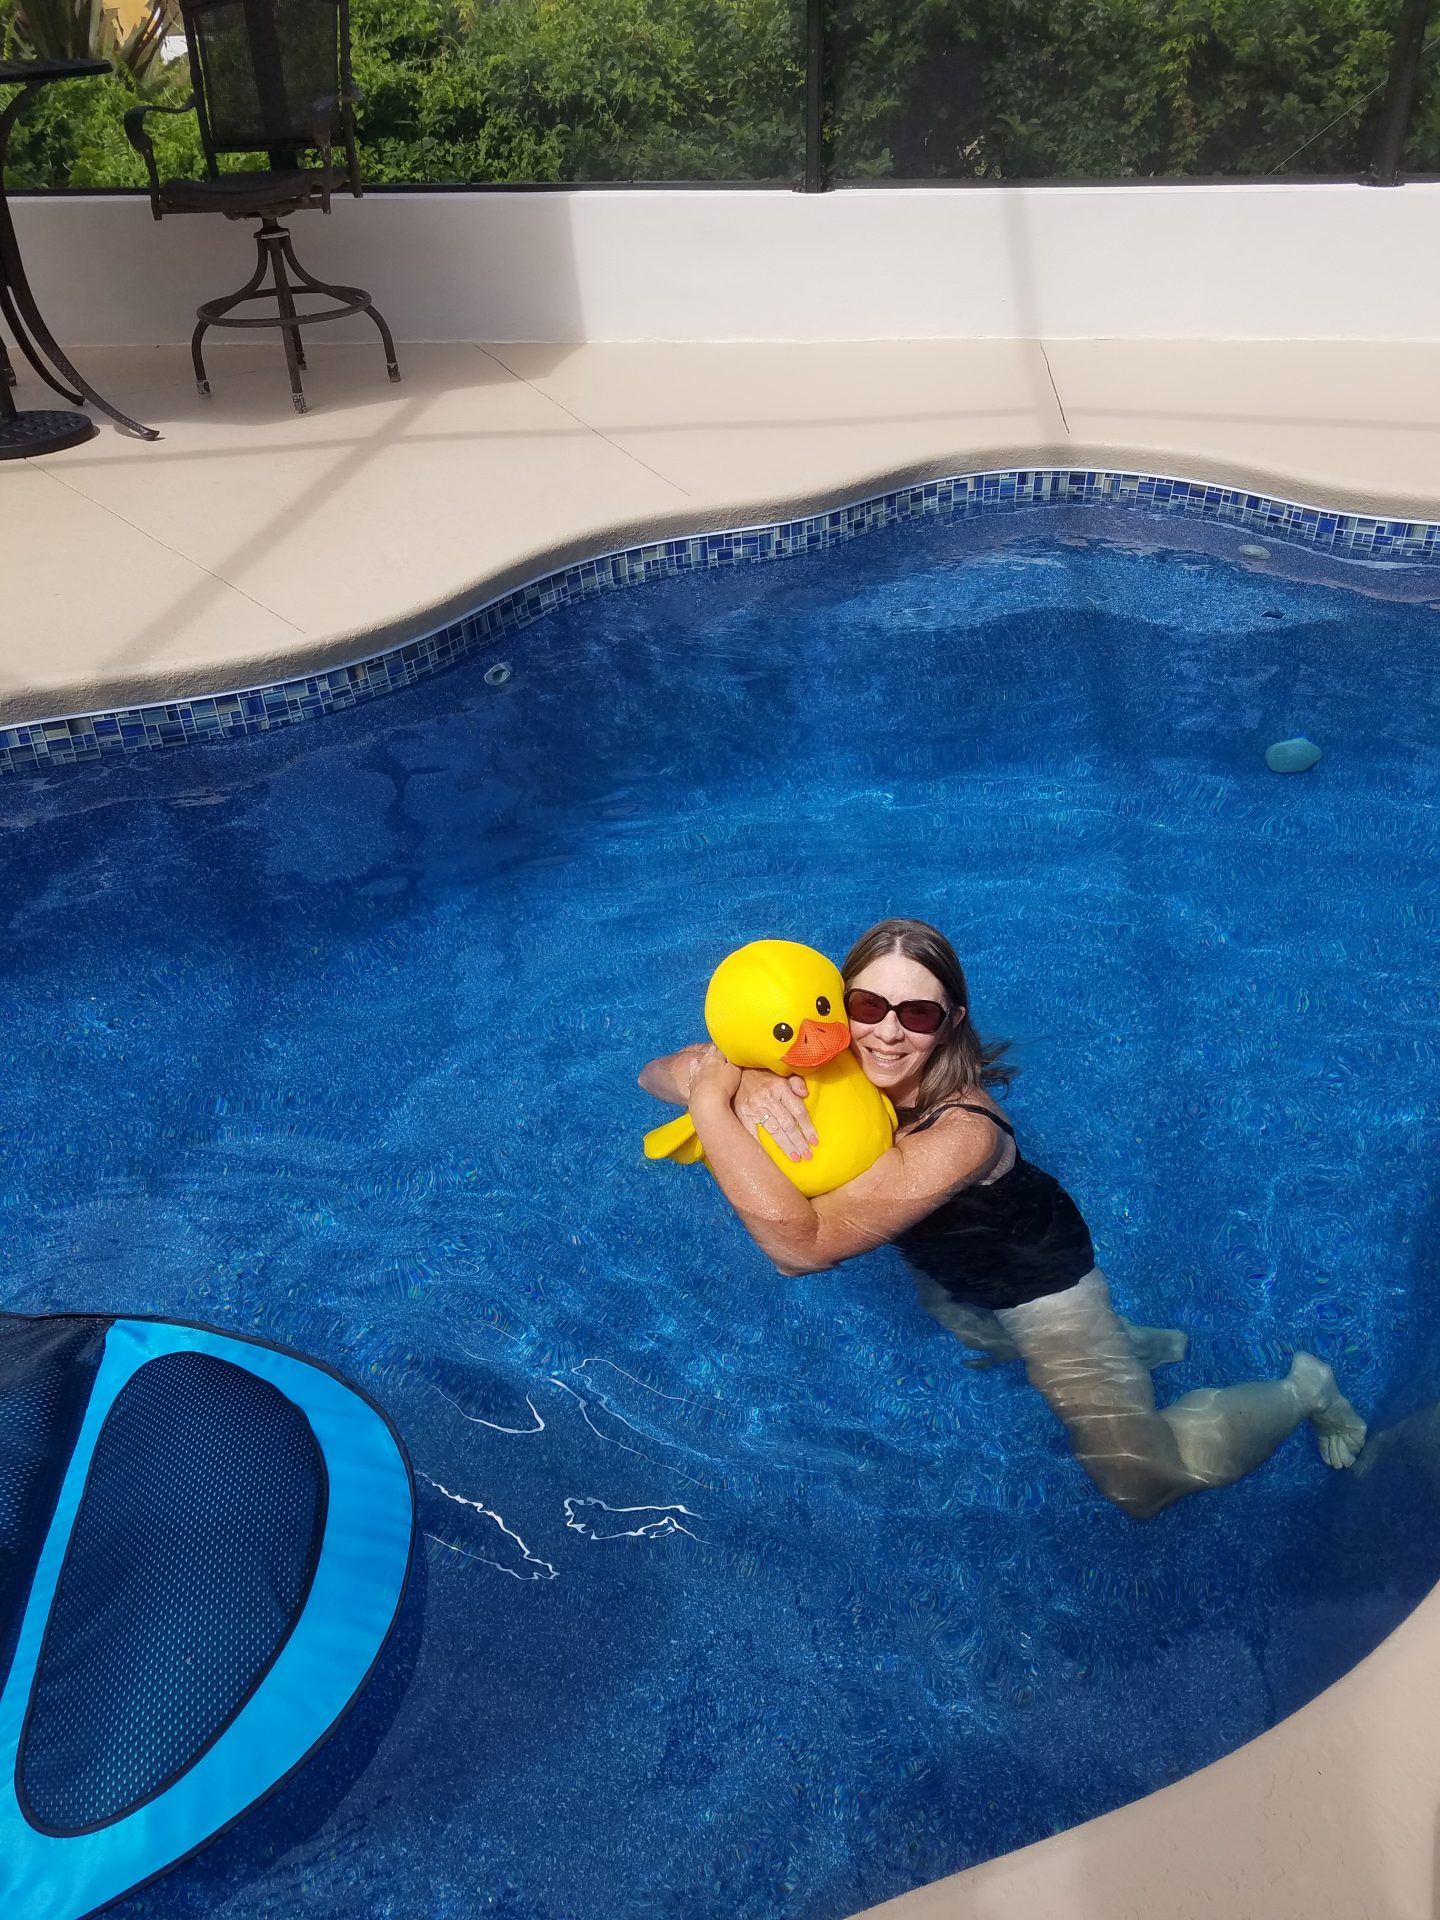 Lynda trying out our pool, that woman loved the water!